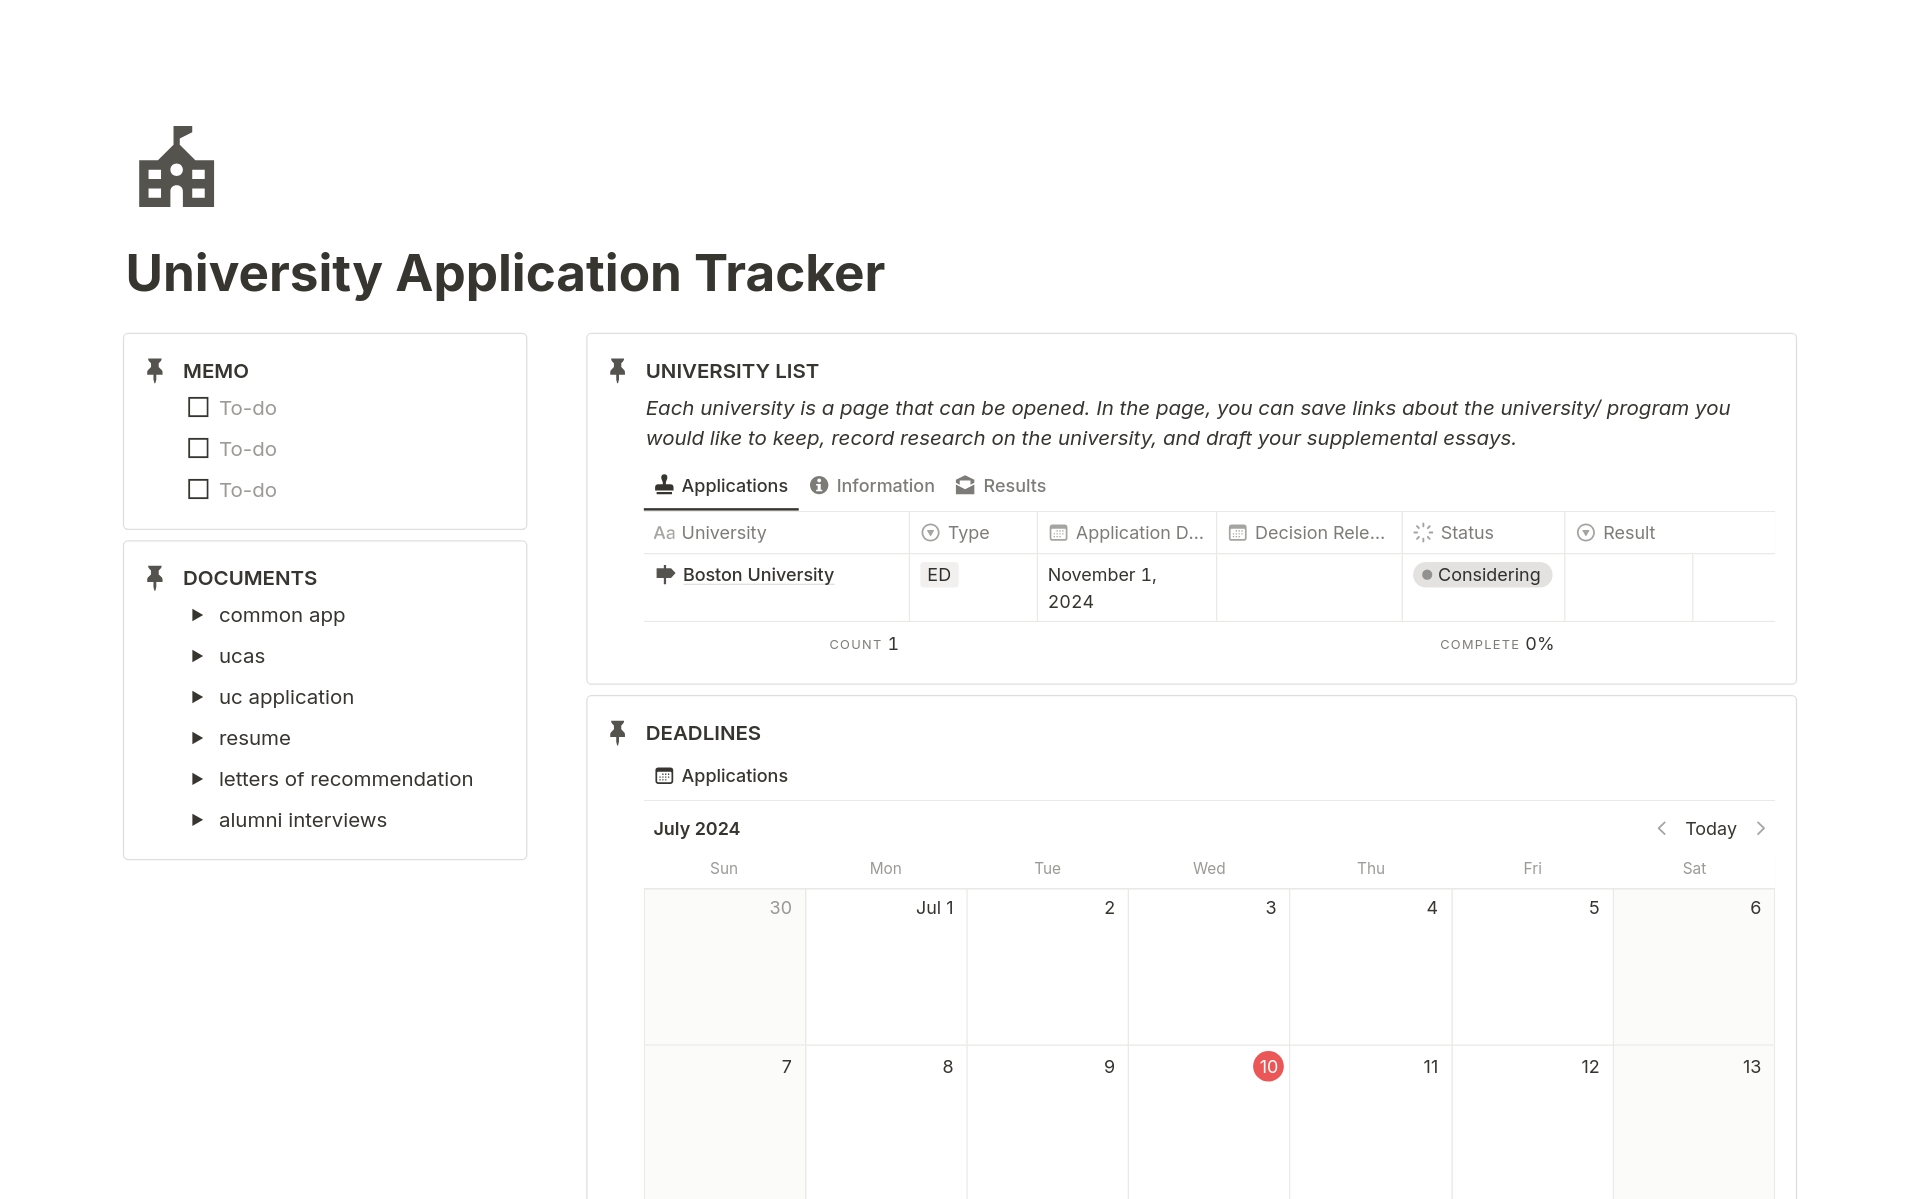 Introducing the ultimate template for university applications. Track progress, store essay drafts, manage extracurriculars, and organize documents --- all in one place. It offers a centralized hub for organizing all the crucial aspects of applying to university!